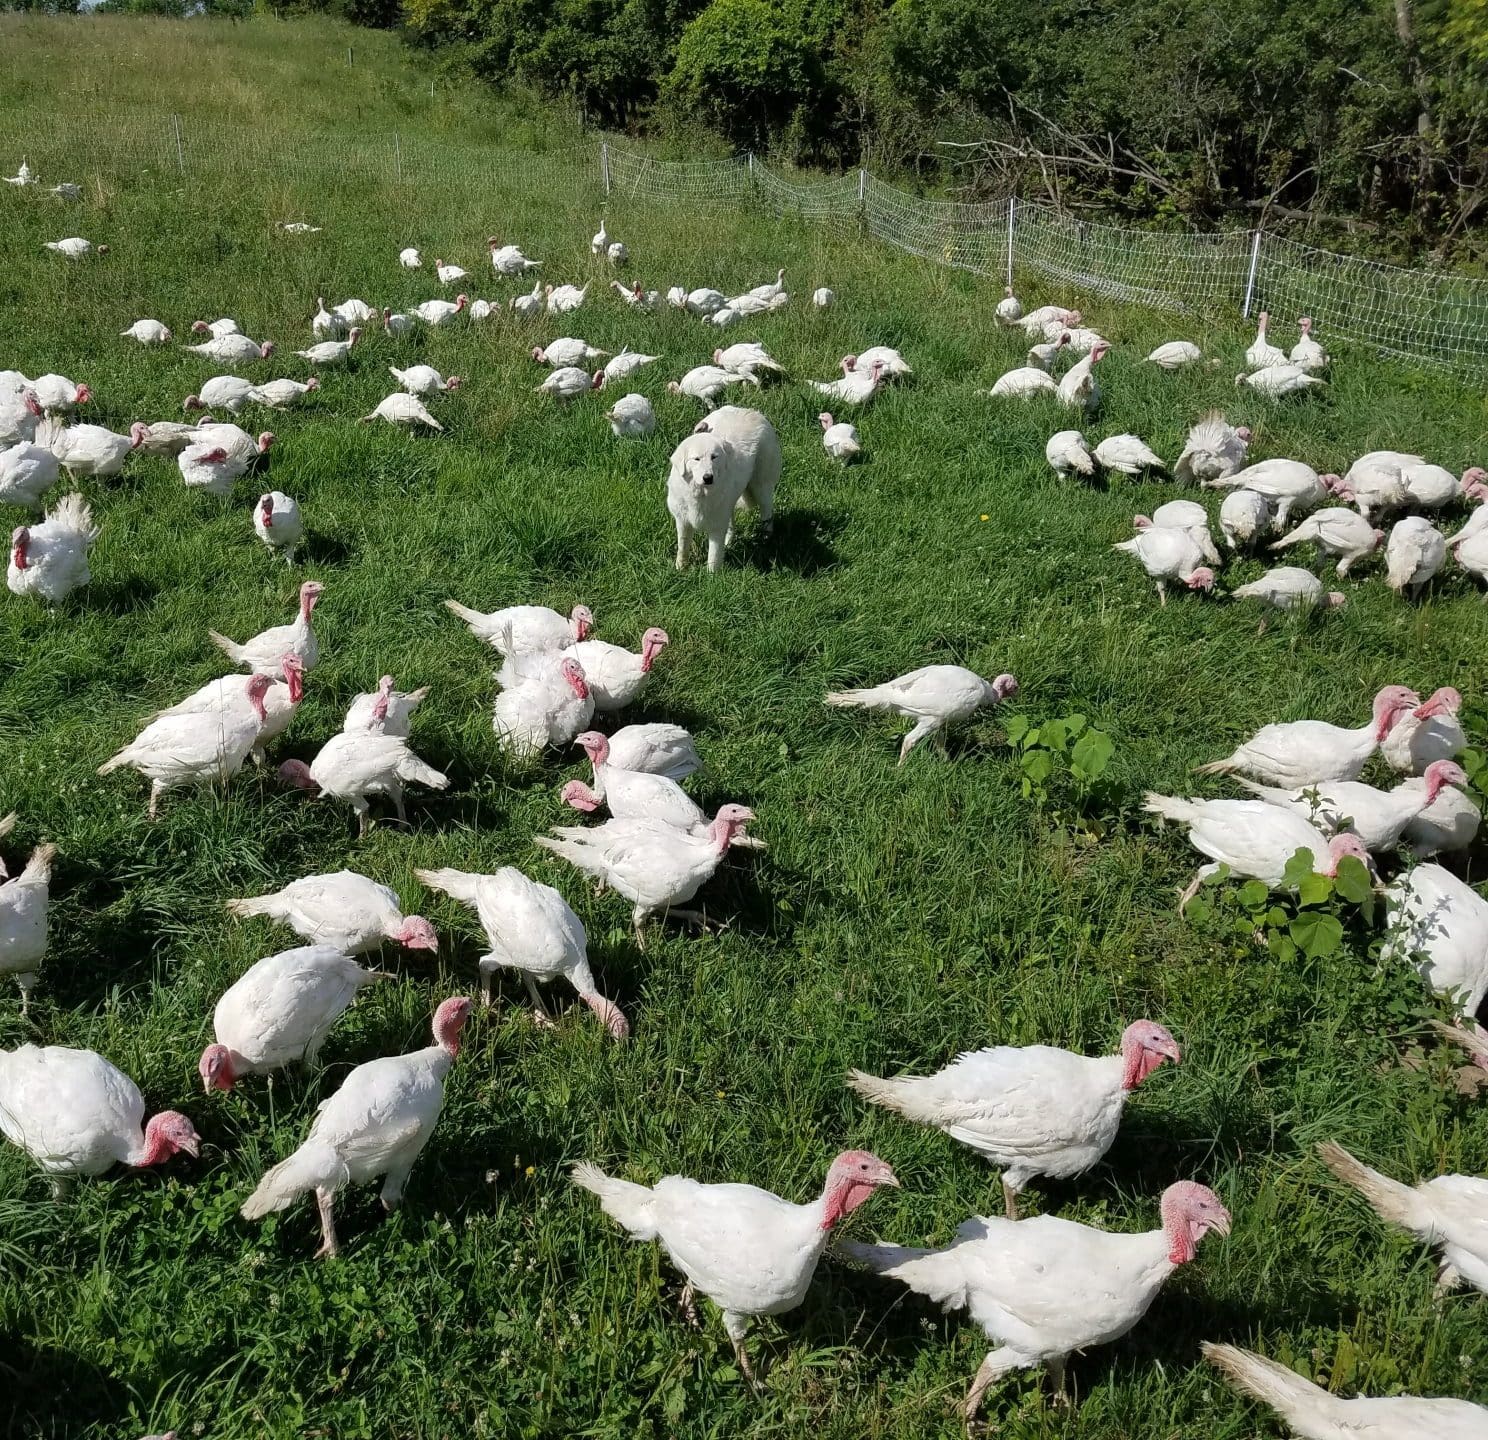 Raising pastured poultry has its challenges, but we find it is always worthwhile for the regenerative benefits to our land. Try some grass fed and pasture raised meat sent right off our farm to your doorstep